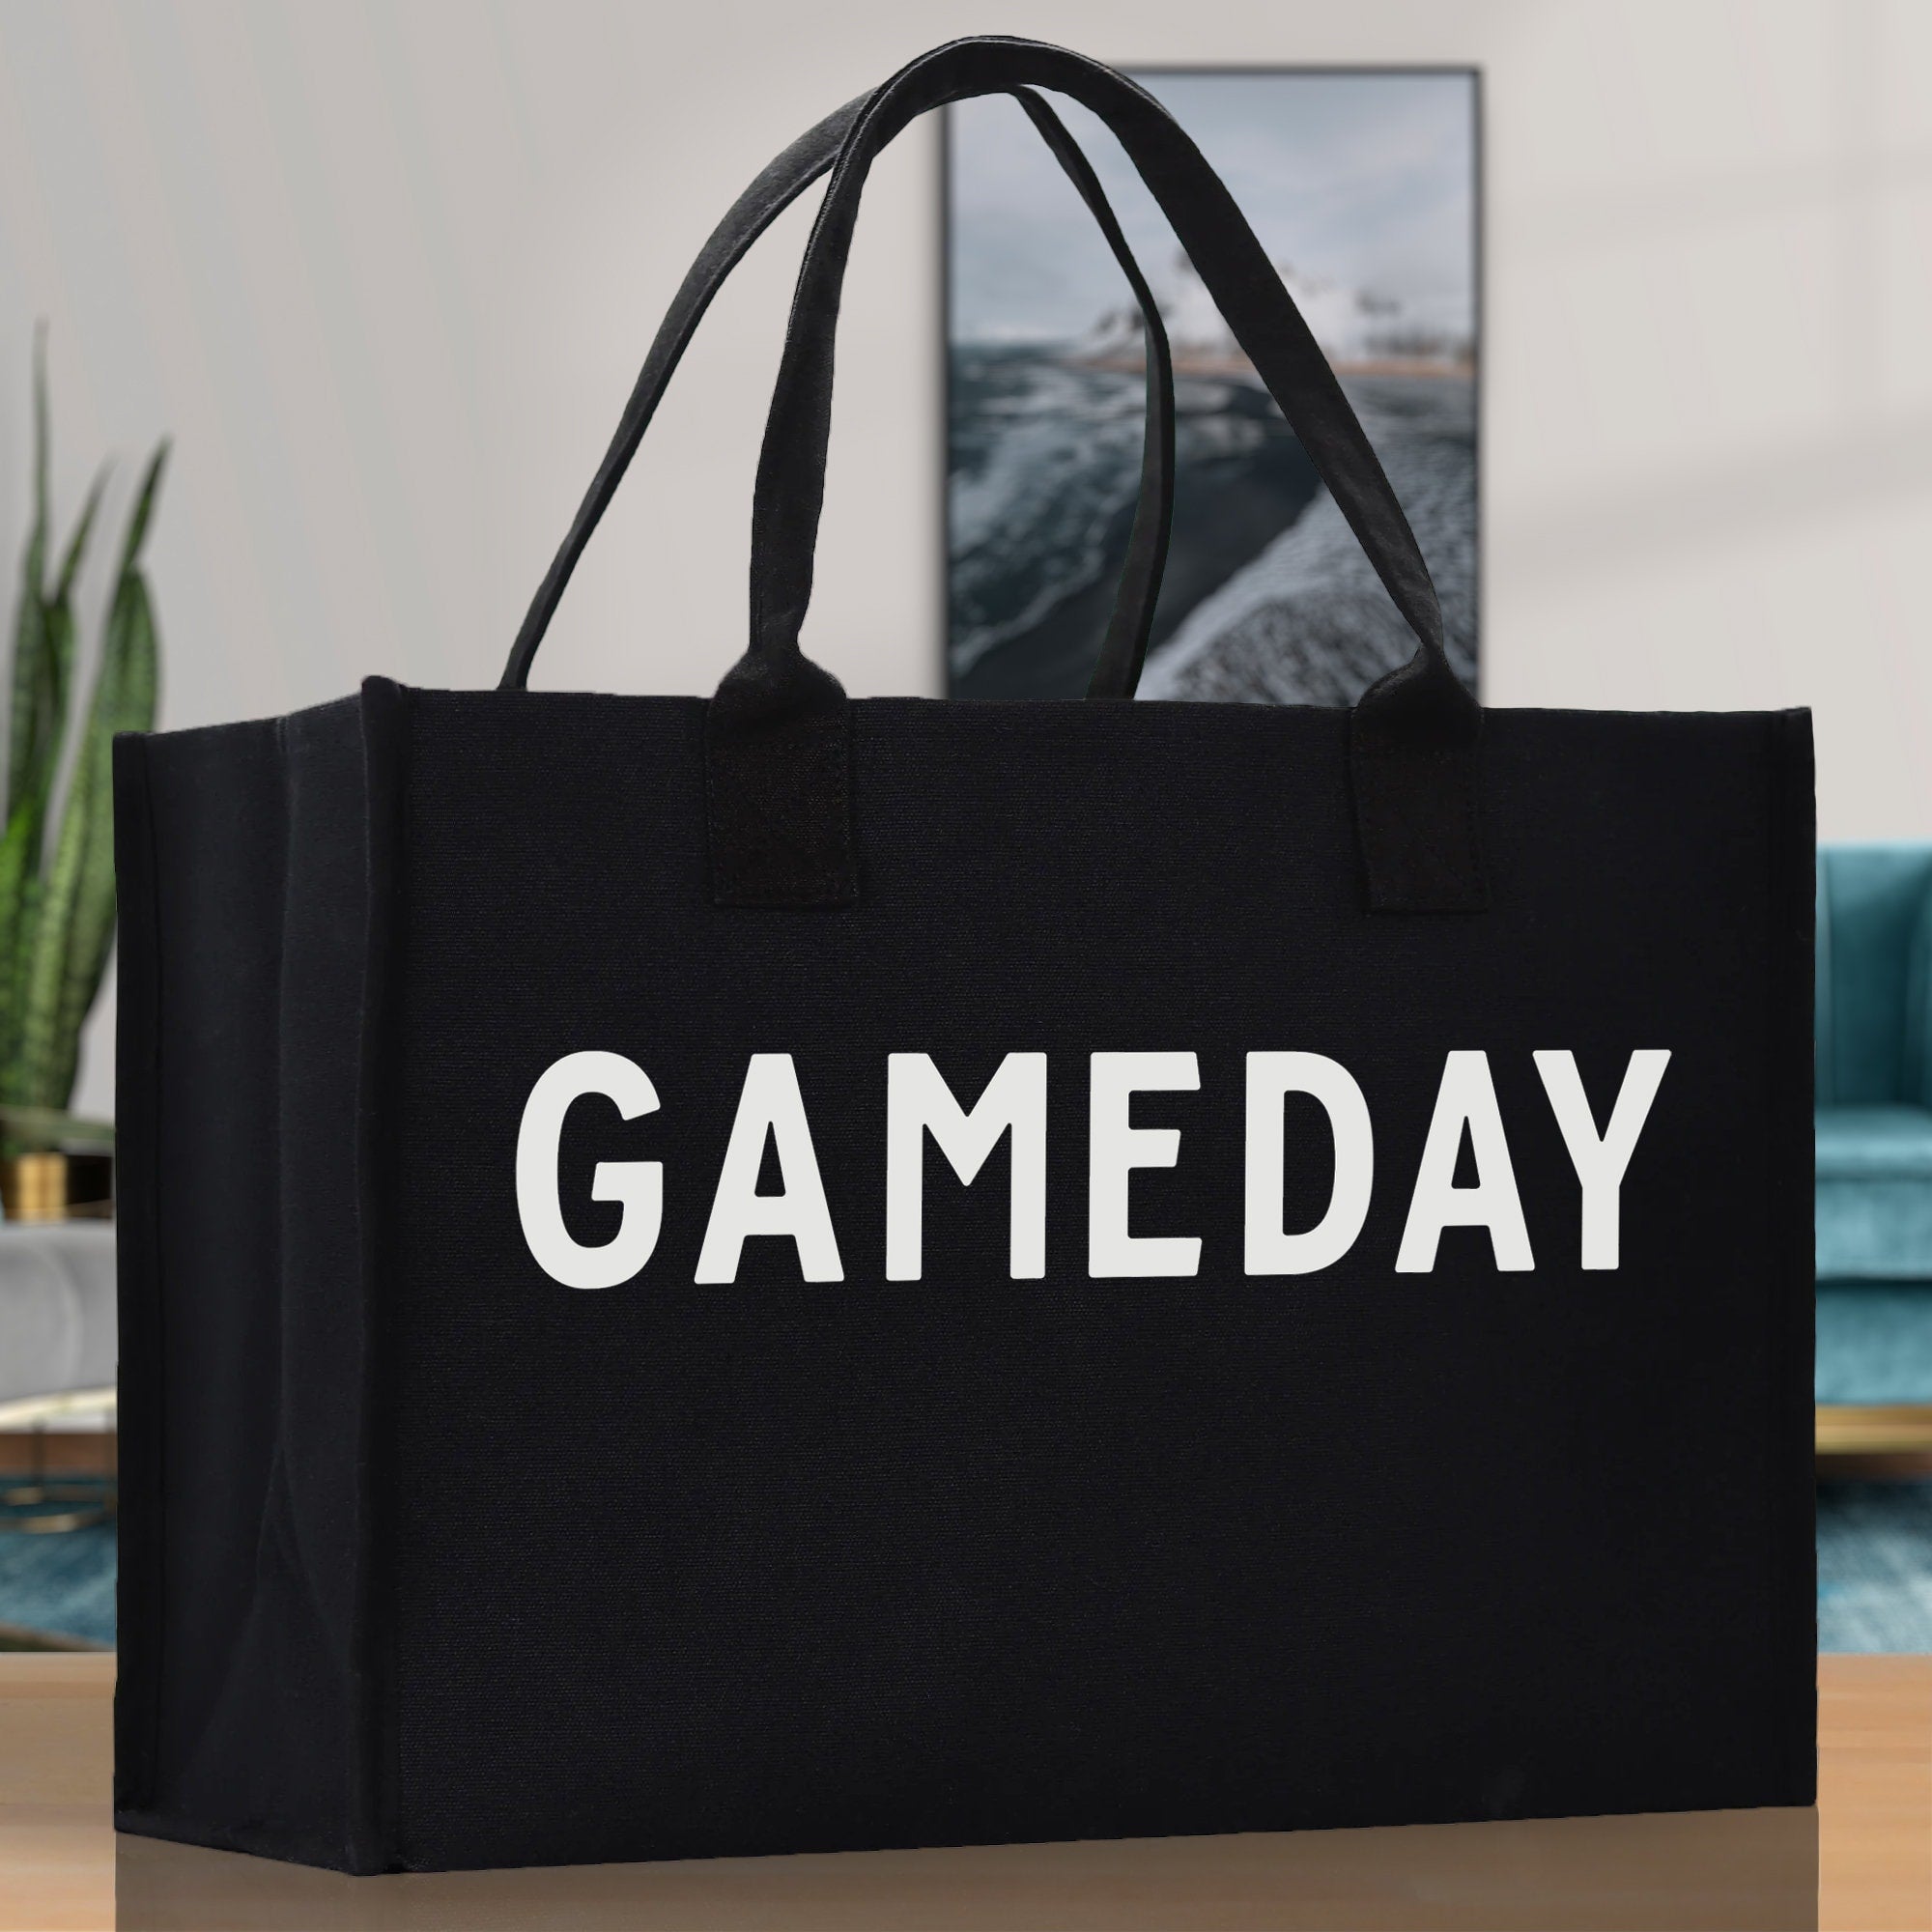 Gameday Cotton Canvas Chic Beach Tote Bag Multipurpose Tote Weekender Tote Gift for Her Outdoor Tote Vacation Tote Large Beach Bag